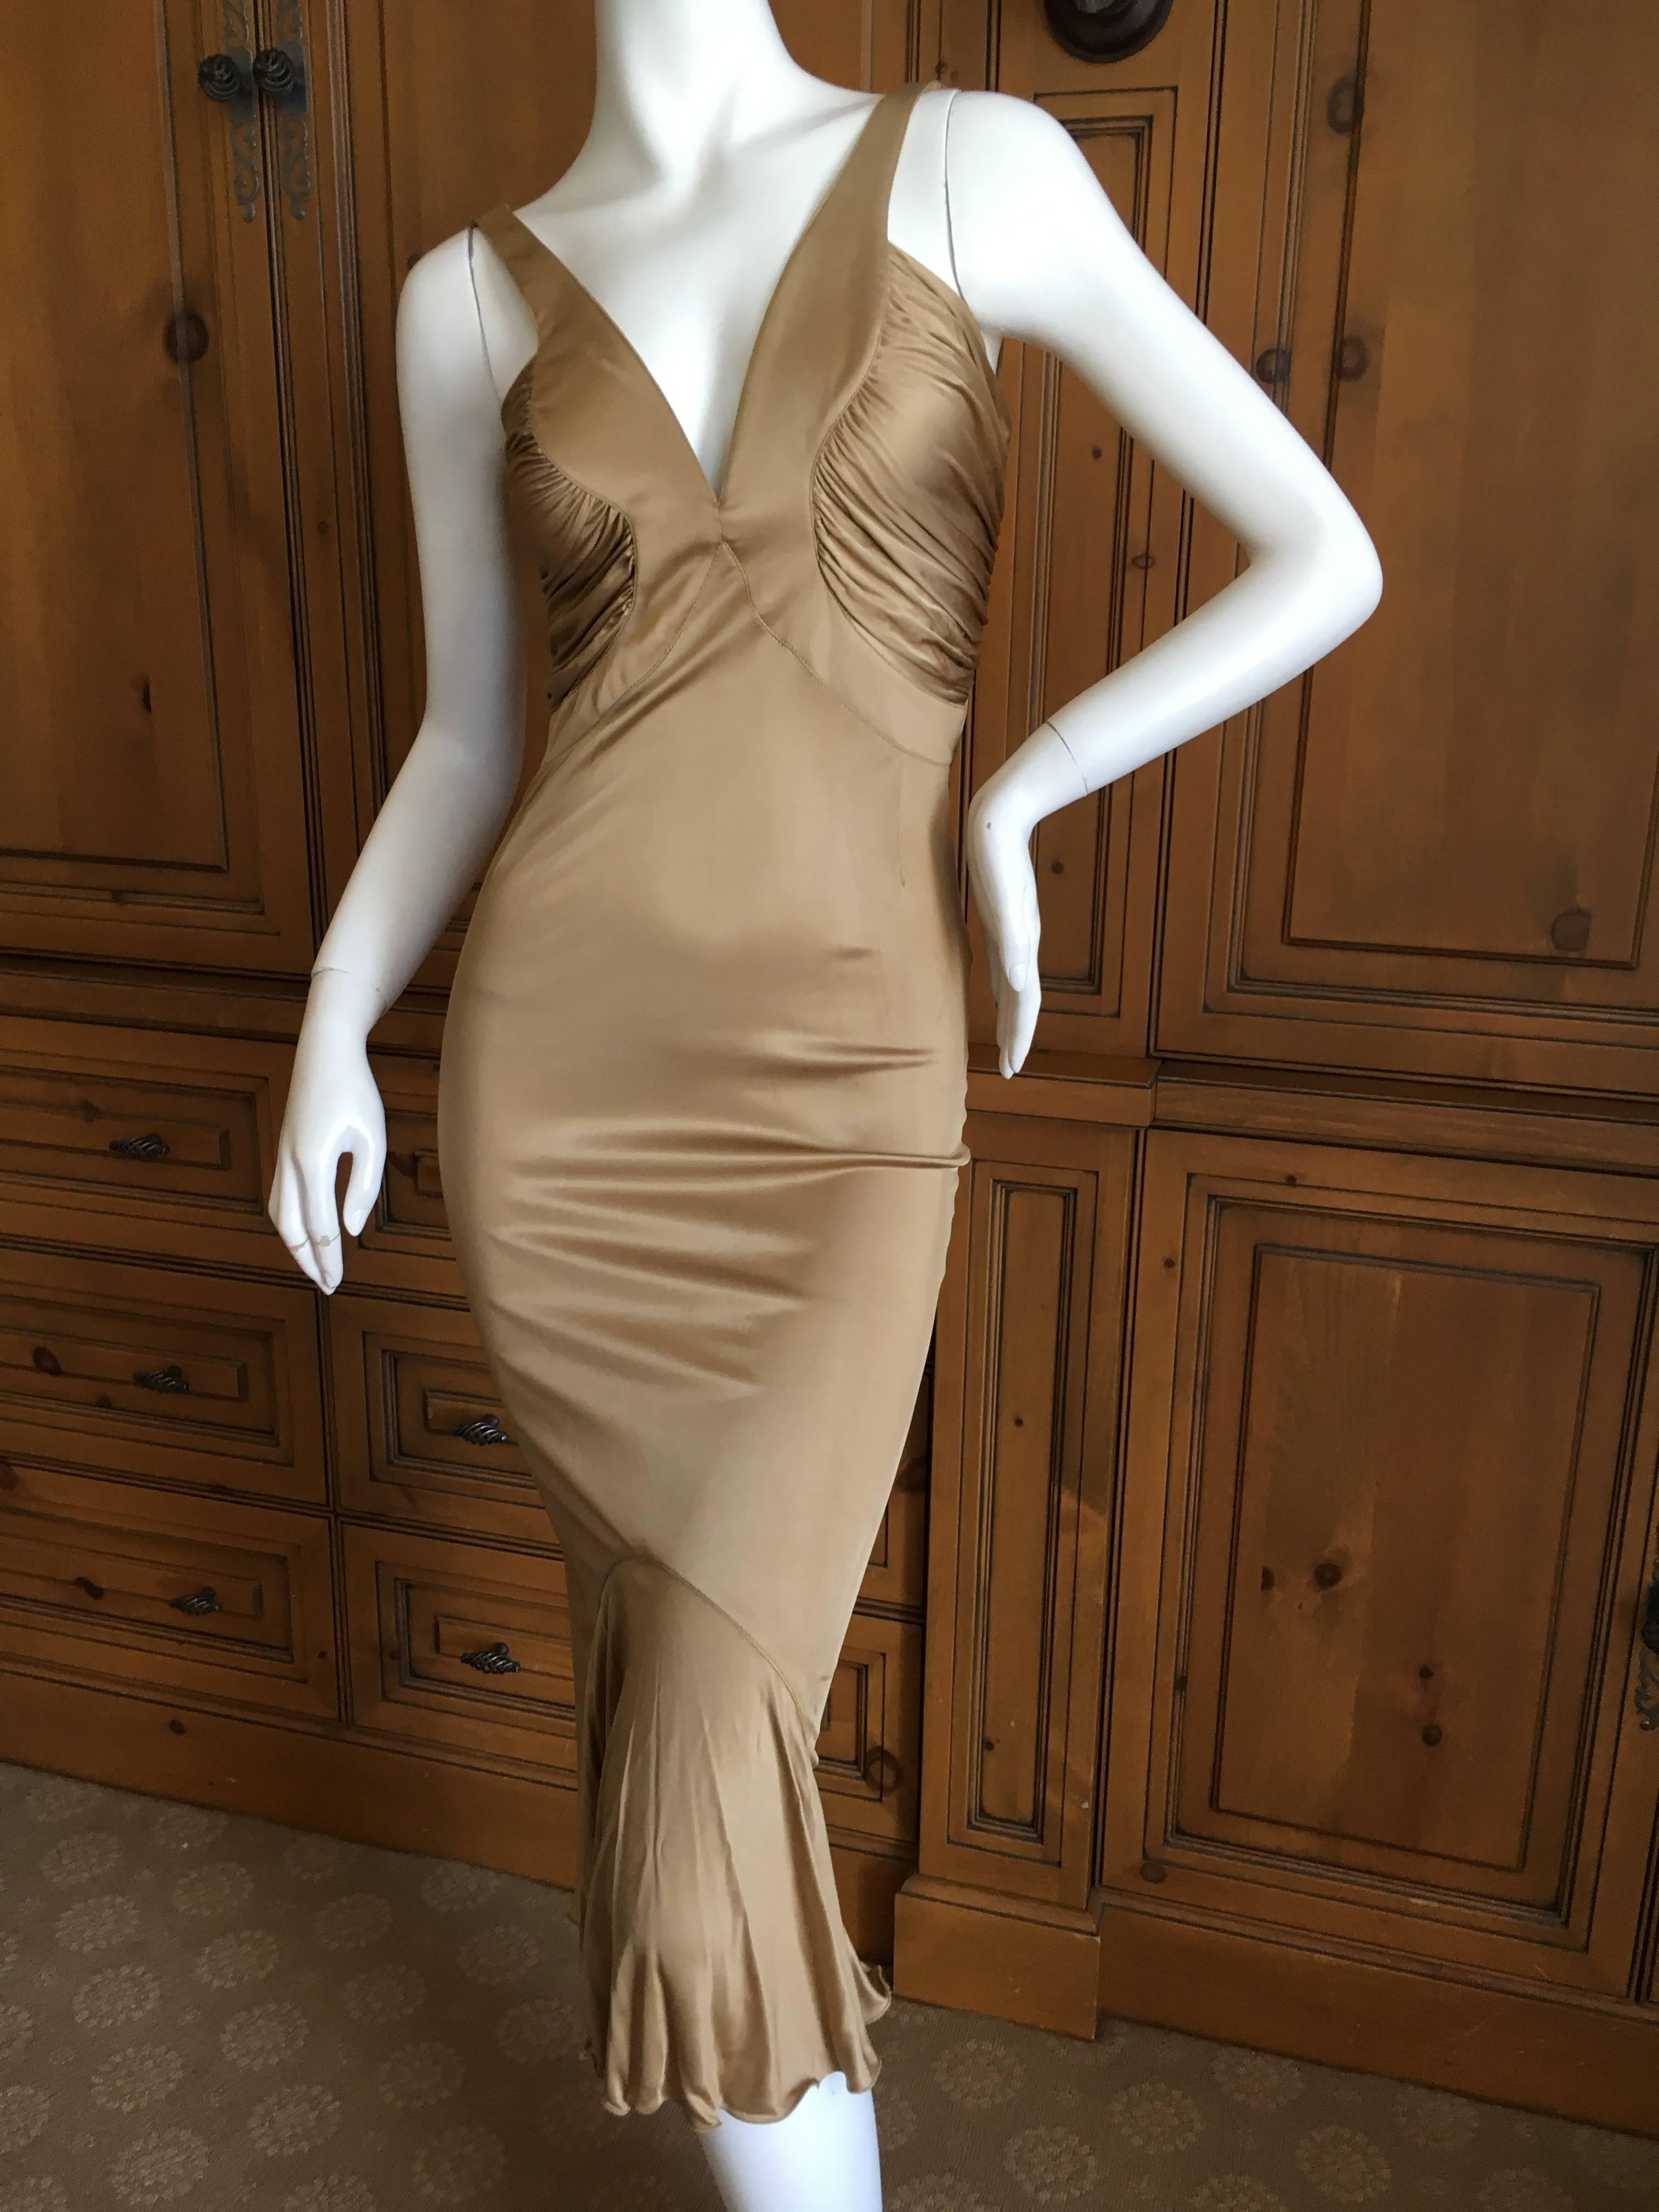 Versace  Gold Jersey Cocktail Dress.
So sexy, like liquid gold, so very body con.
Size 42 US 8
Bust 36
Waist 29